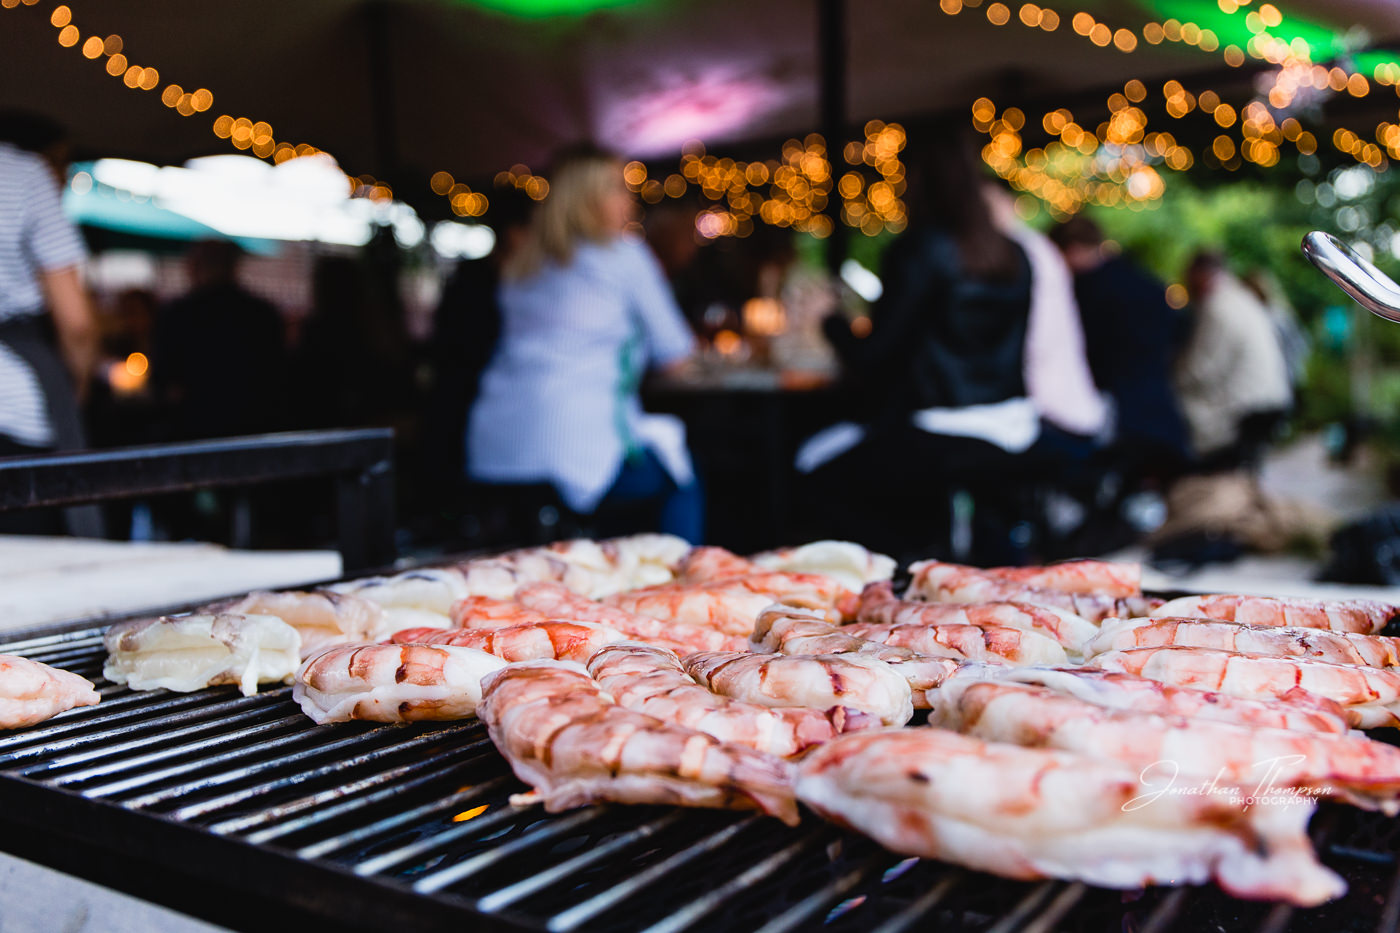 Low angle view of king prawns laying side by side on a bbq grill with diners sitting at tables in the background. Chester Zoo